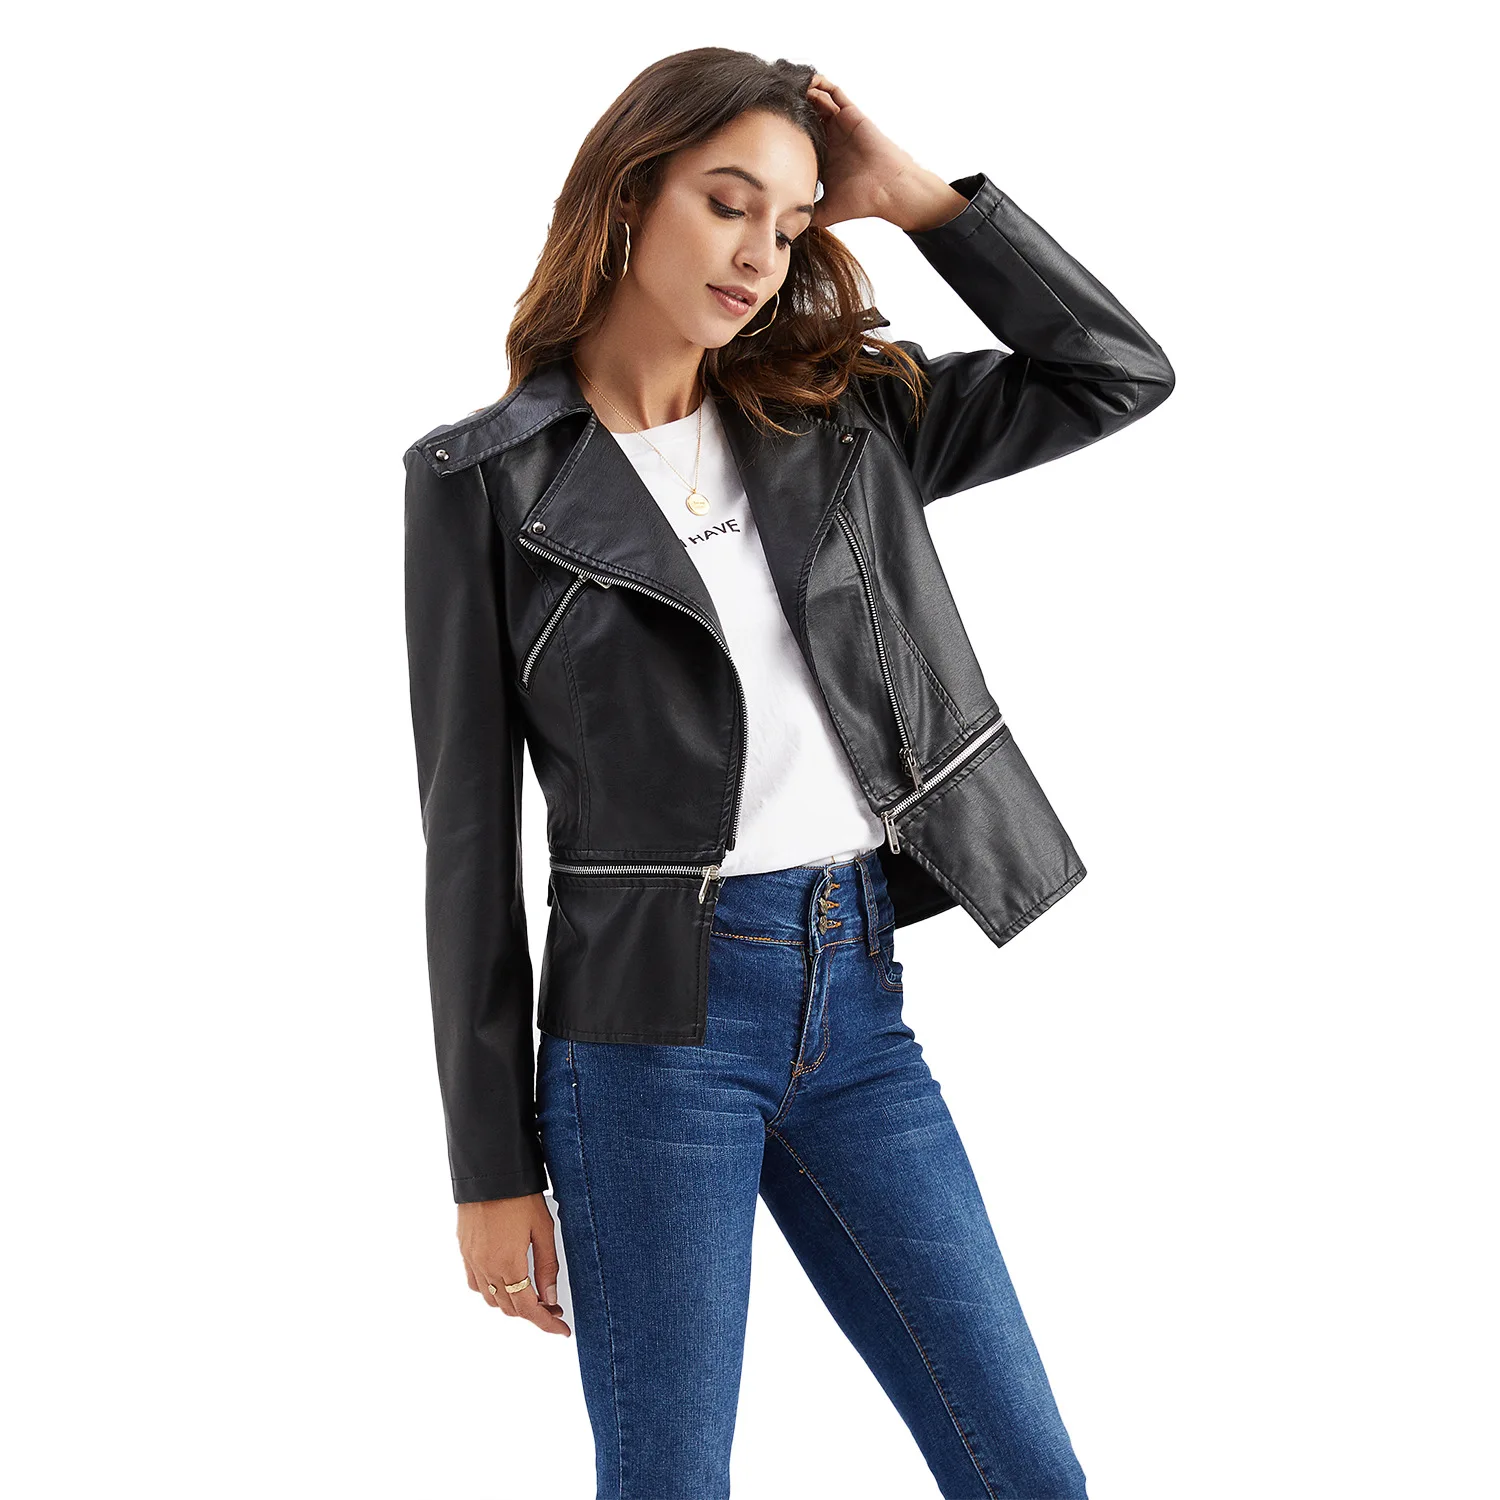 european and american fashion women s spring and autumn new zipper long sleeve splicing reflective sports leisure two piece set Women's Leisure Hem Detachable Leather Jacket, Spring and Autumn Coat, European and American Fashion, High-Quality Lapel Zipper,